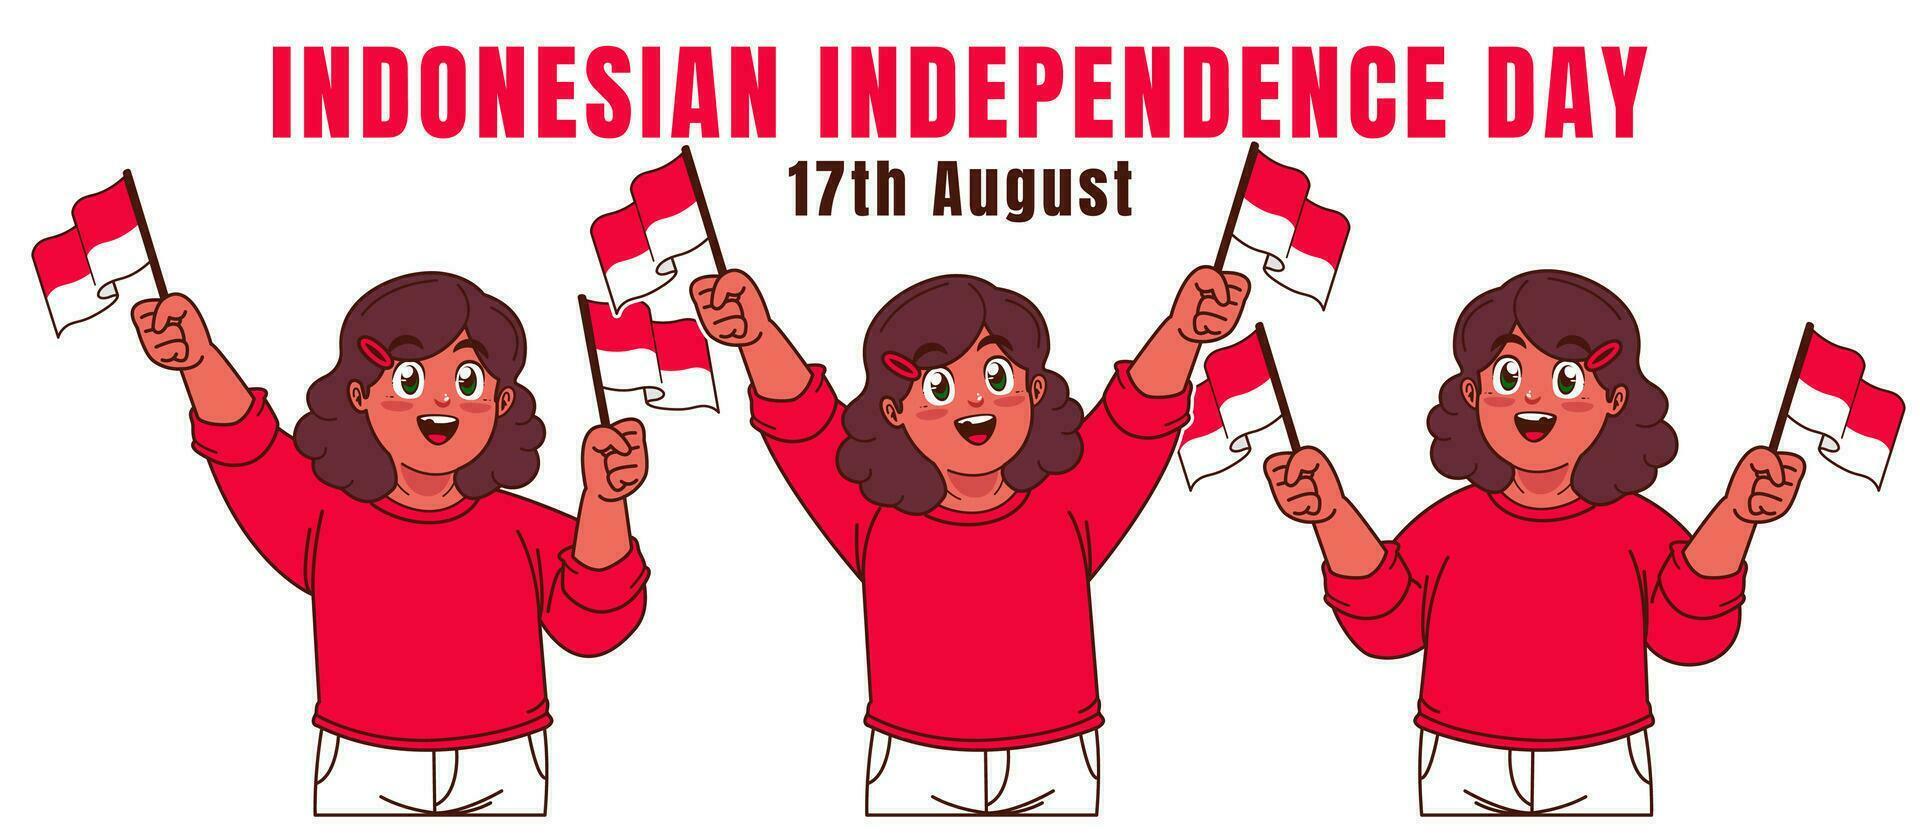 Little girl waving Indonesian flag, Indonesia independence day celebration vector